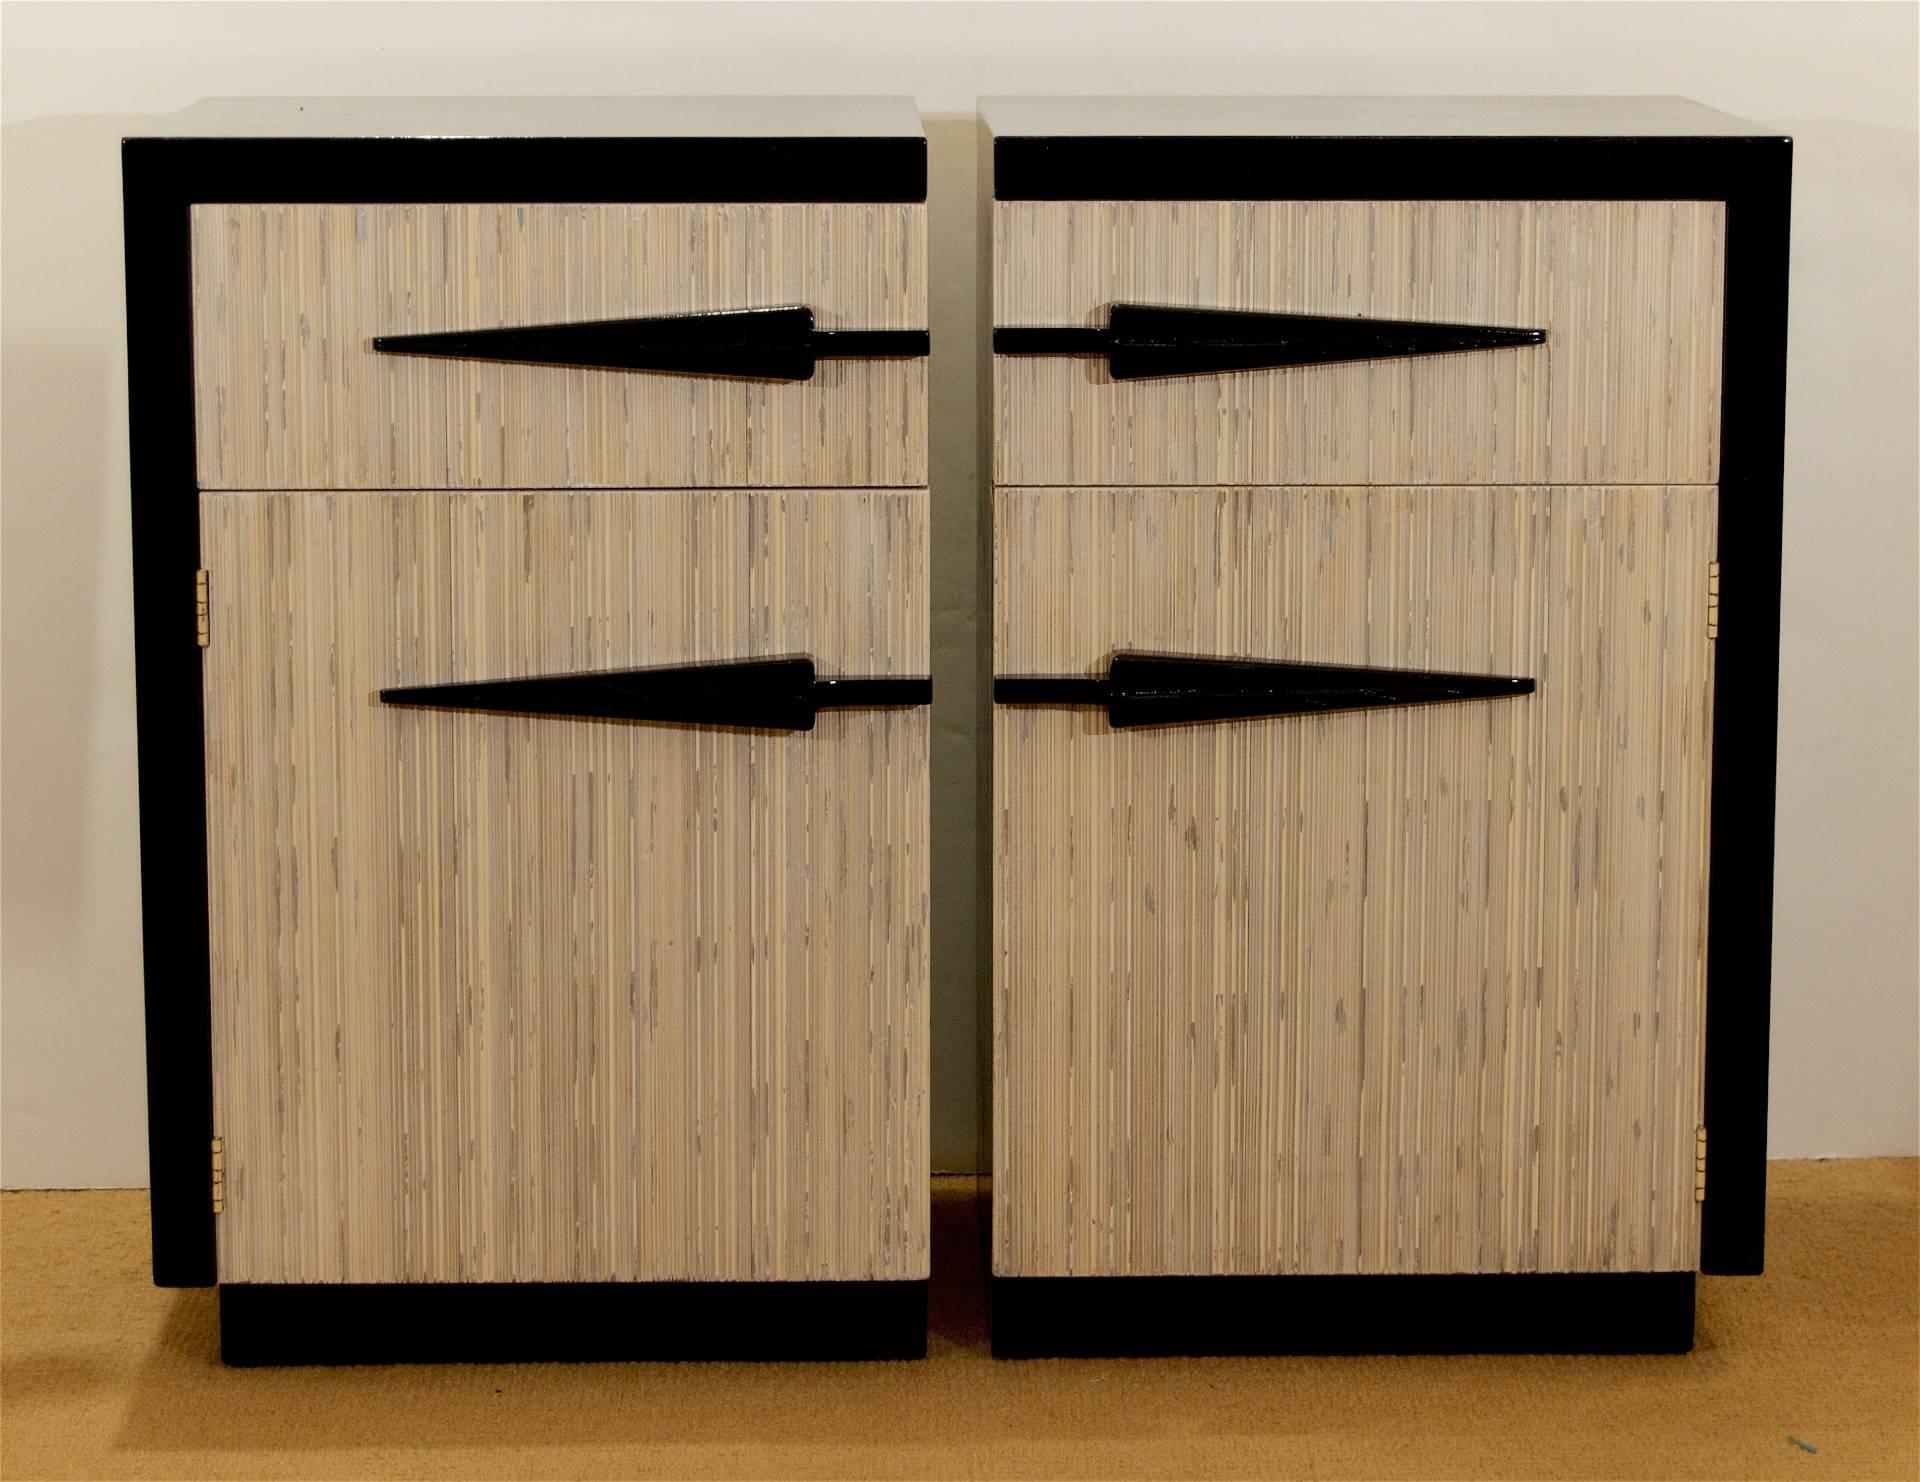 Very unusual set of midcentury American nightstands, the body in gloss black lacquer with arrow-head style pulls on the drawer and door fronts - the inset cabinetry fronted with a textural, bamboo or reed style surface. An extra shelf in the lower